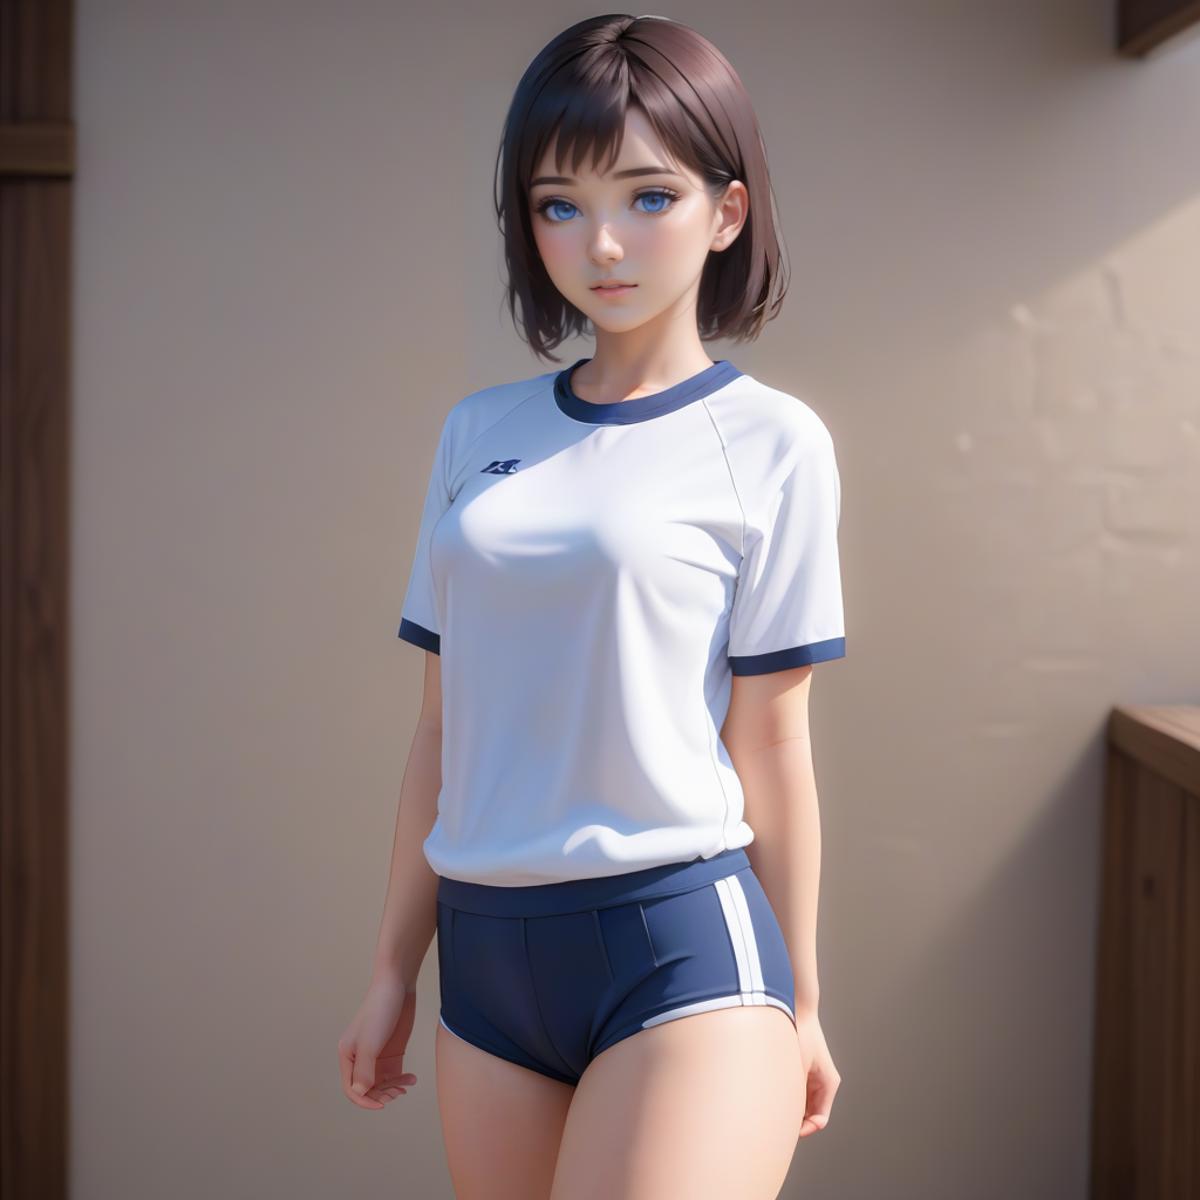 AI model image by H1ghSyst3m